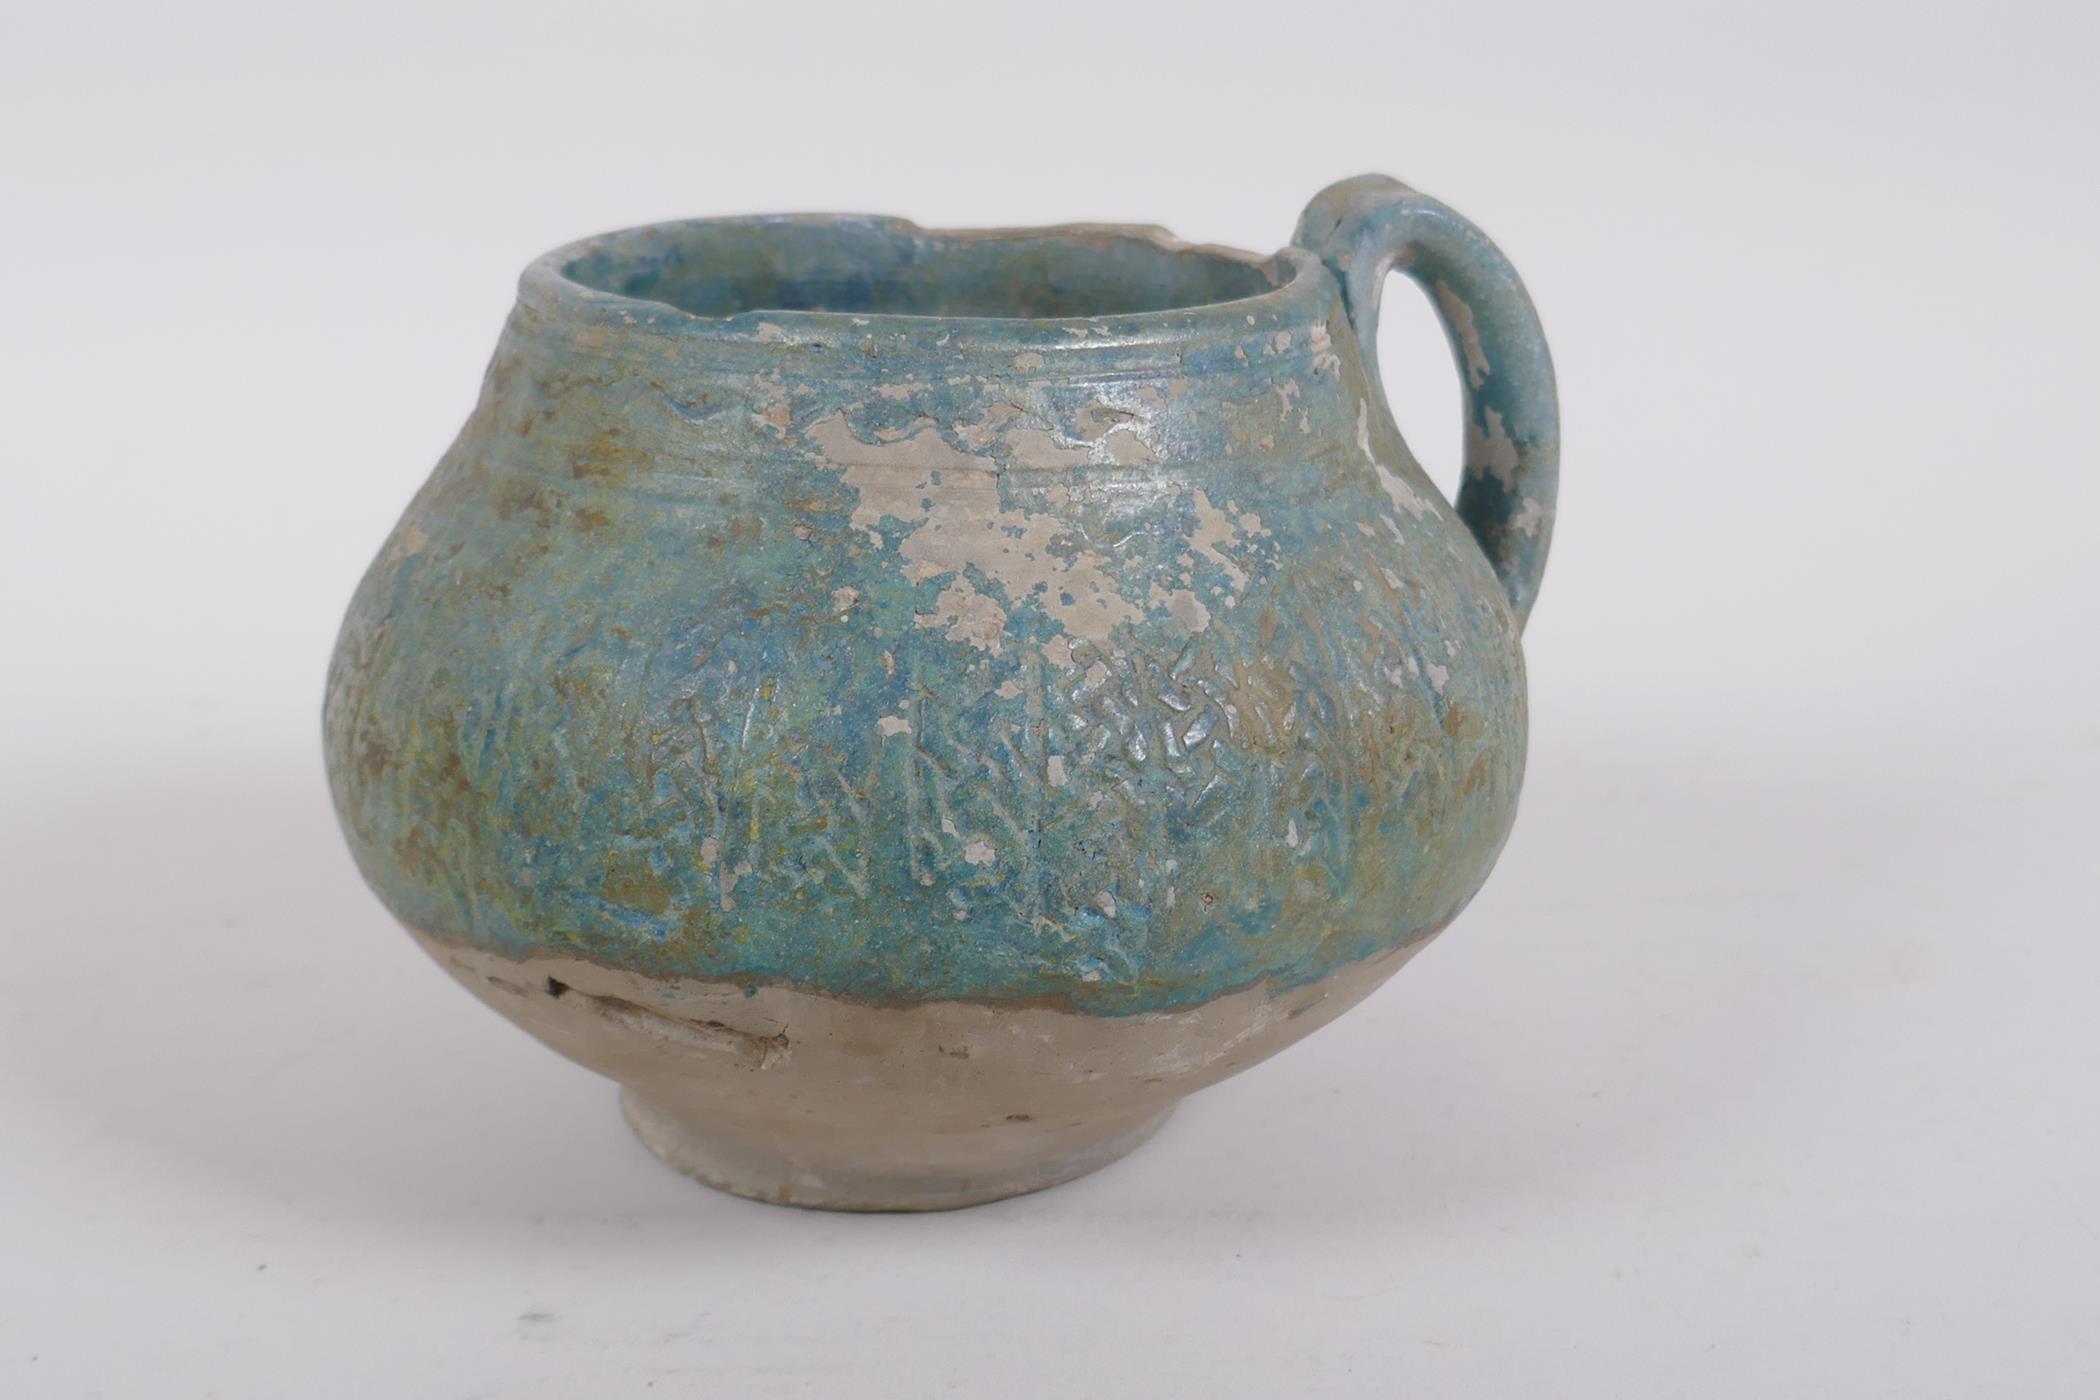 An antique turquoise slip glazed terracotta pot with a single handle, historic repairs, 14cm - Image 3 of 7